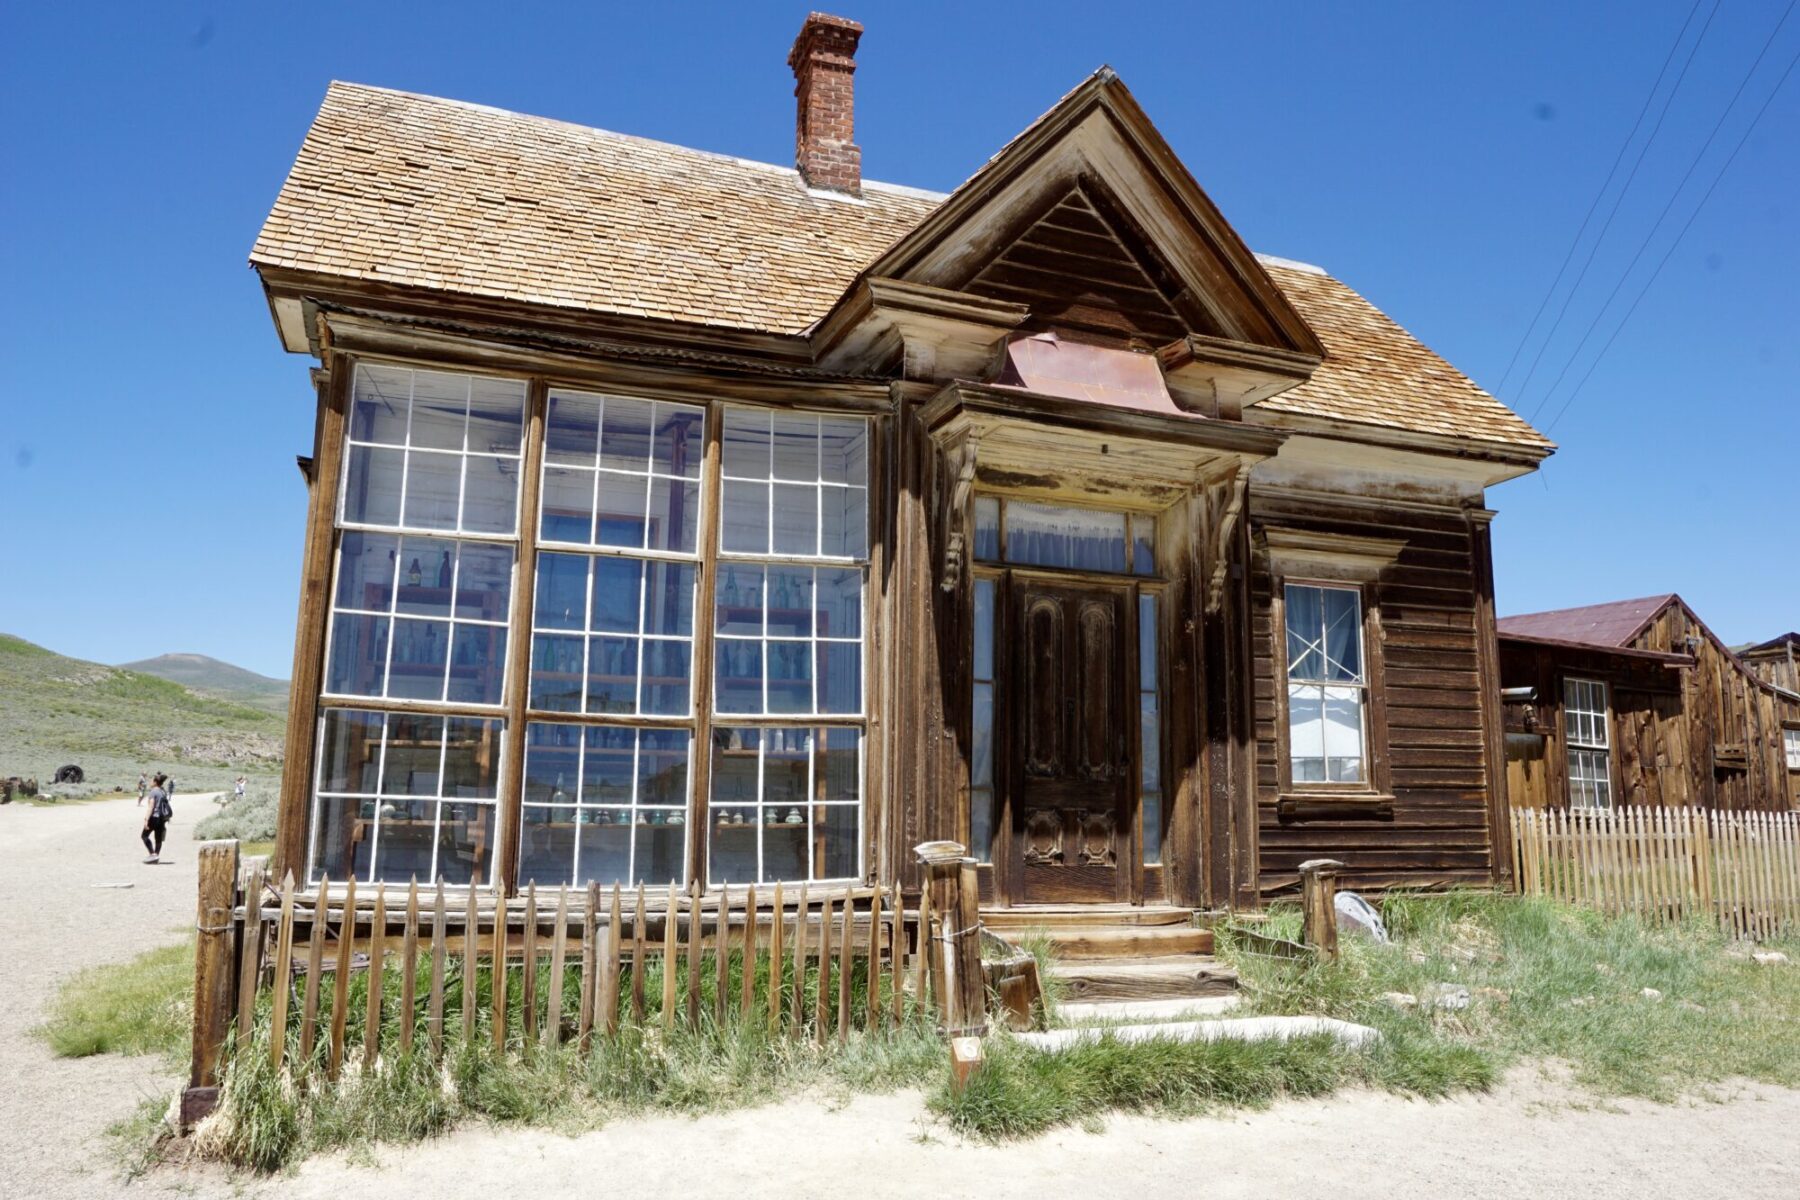 James S Cain House Bodie CA